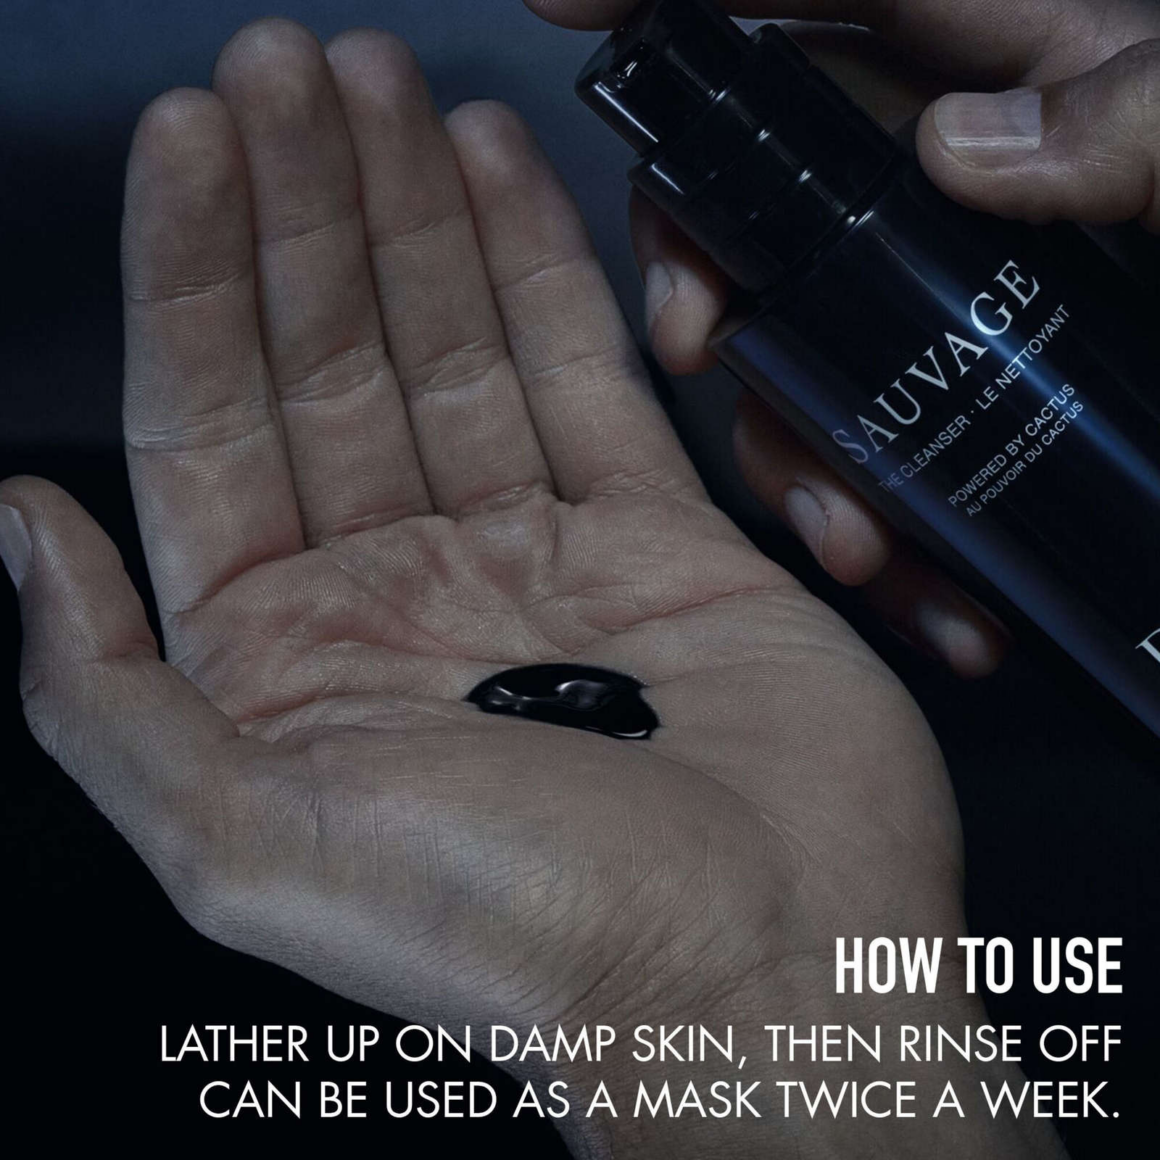 How to use the cleanser. Dior beauty's Sauvage mencare skincare collection line made from Cactus new.